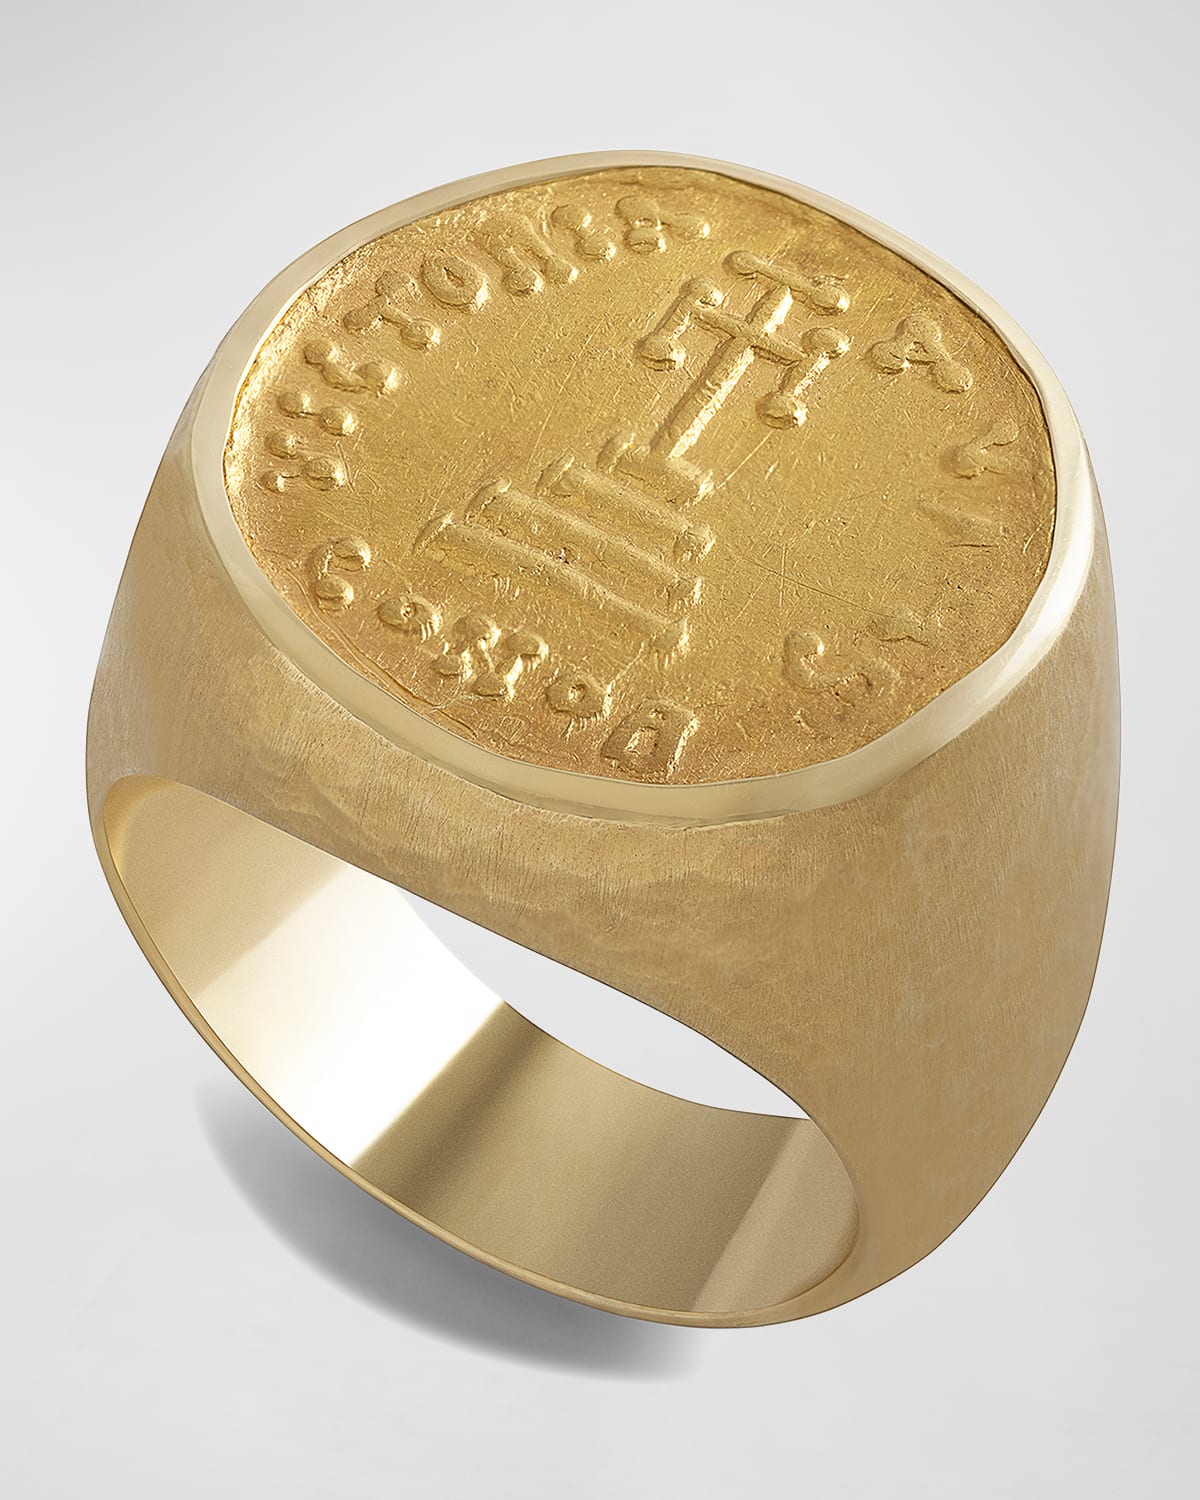 JORGE ADELER MEN'S 18K HAMMERED YELLOW GOLD VICTORIA COIN RING